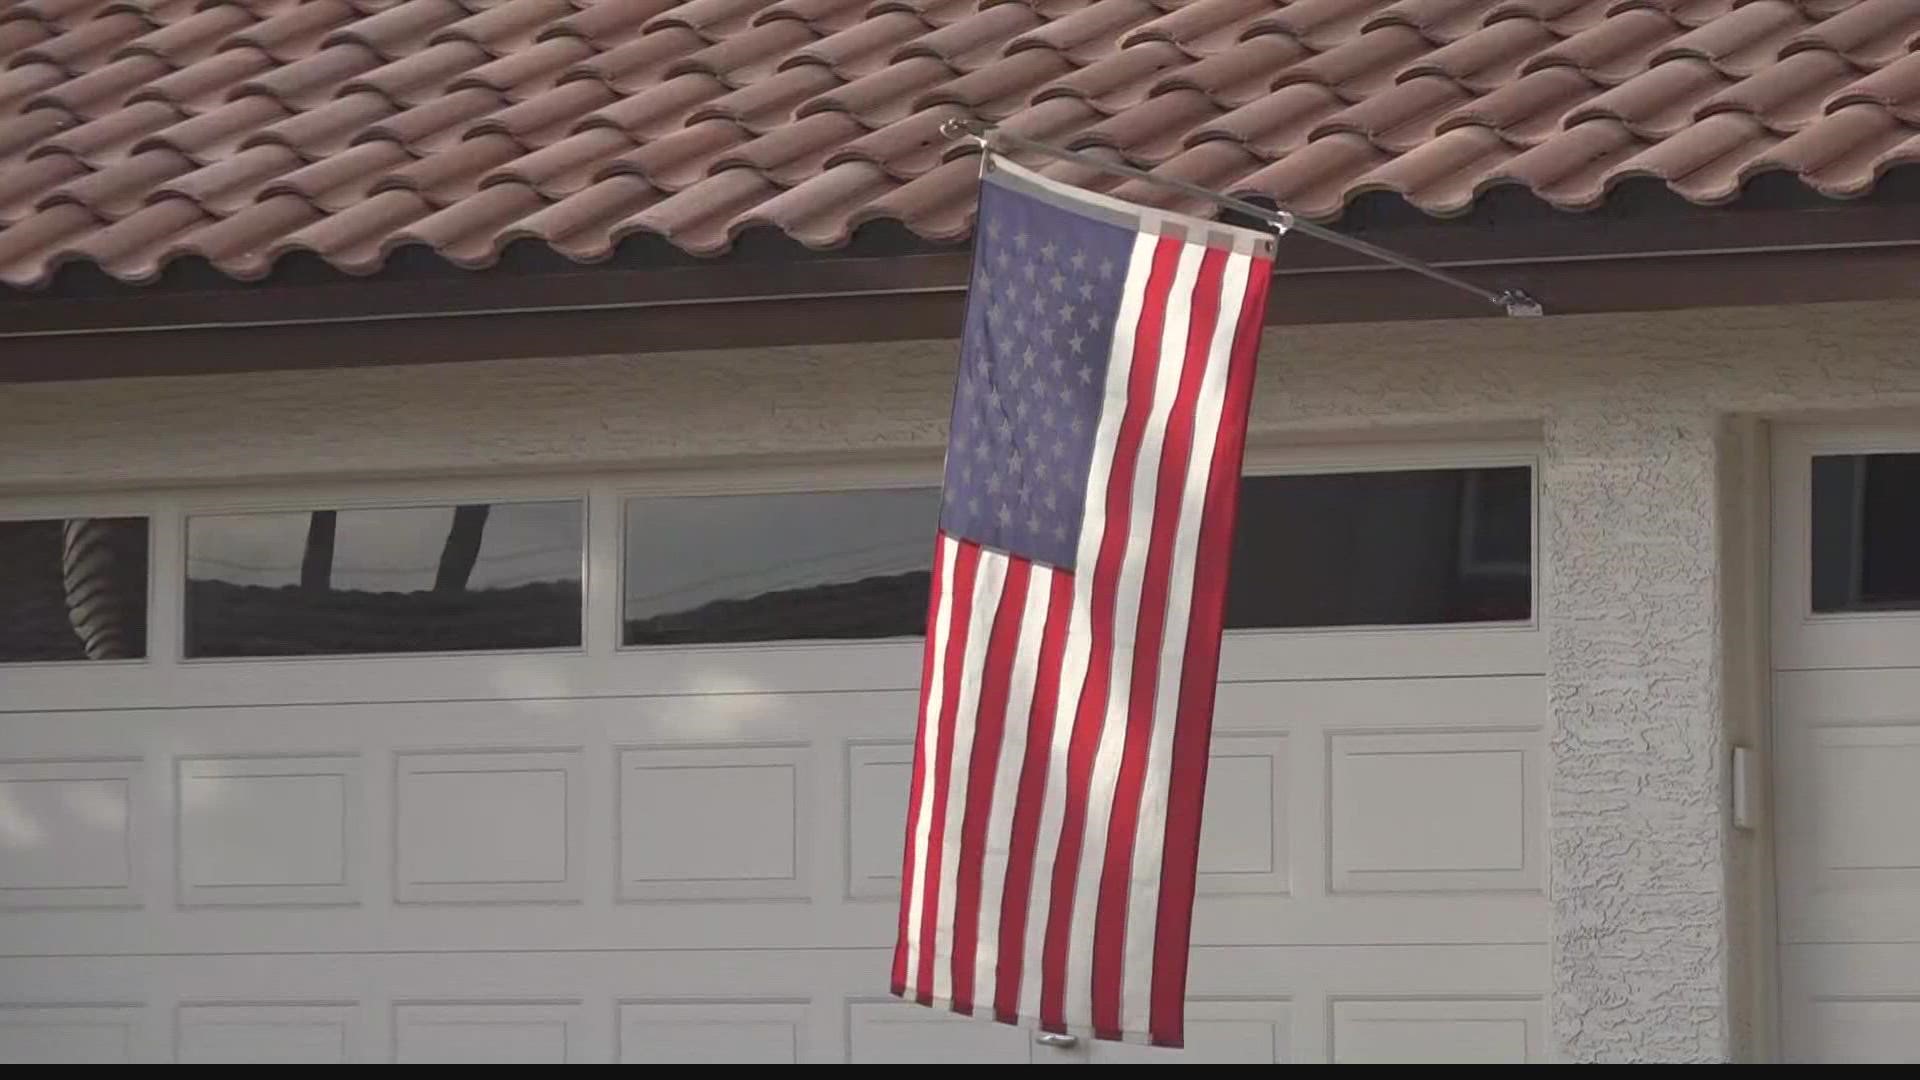 Arizona homeowners will have more freedom to fly flags despite HOA rules.